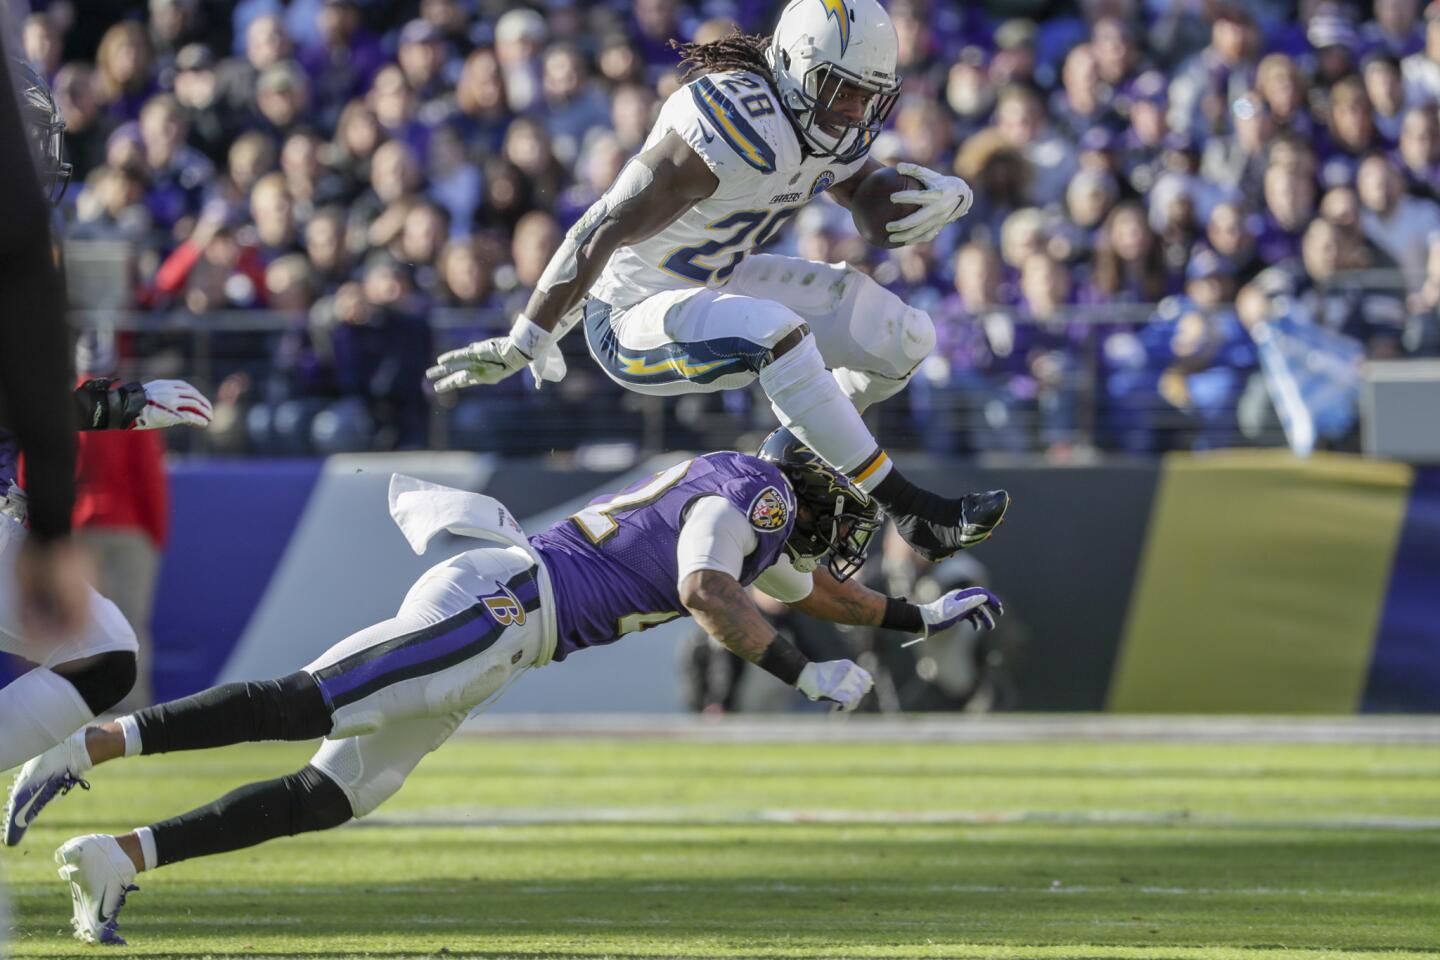 Chargers running back Melvin Gordon leaps over Ravens cornerback Jimmy Smith for a short gain during the first half.